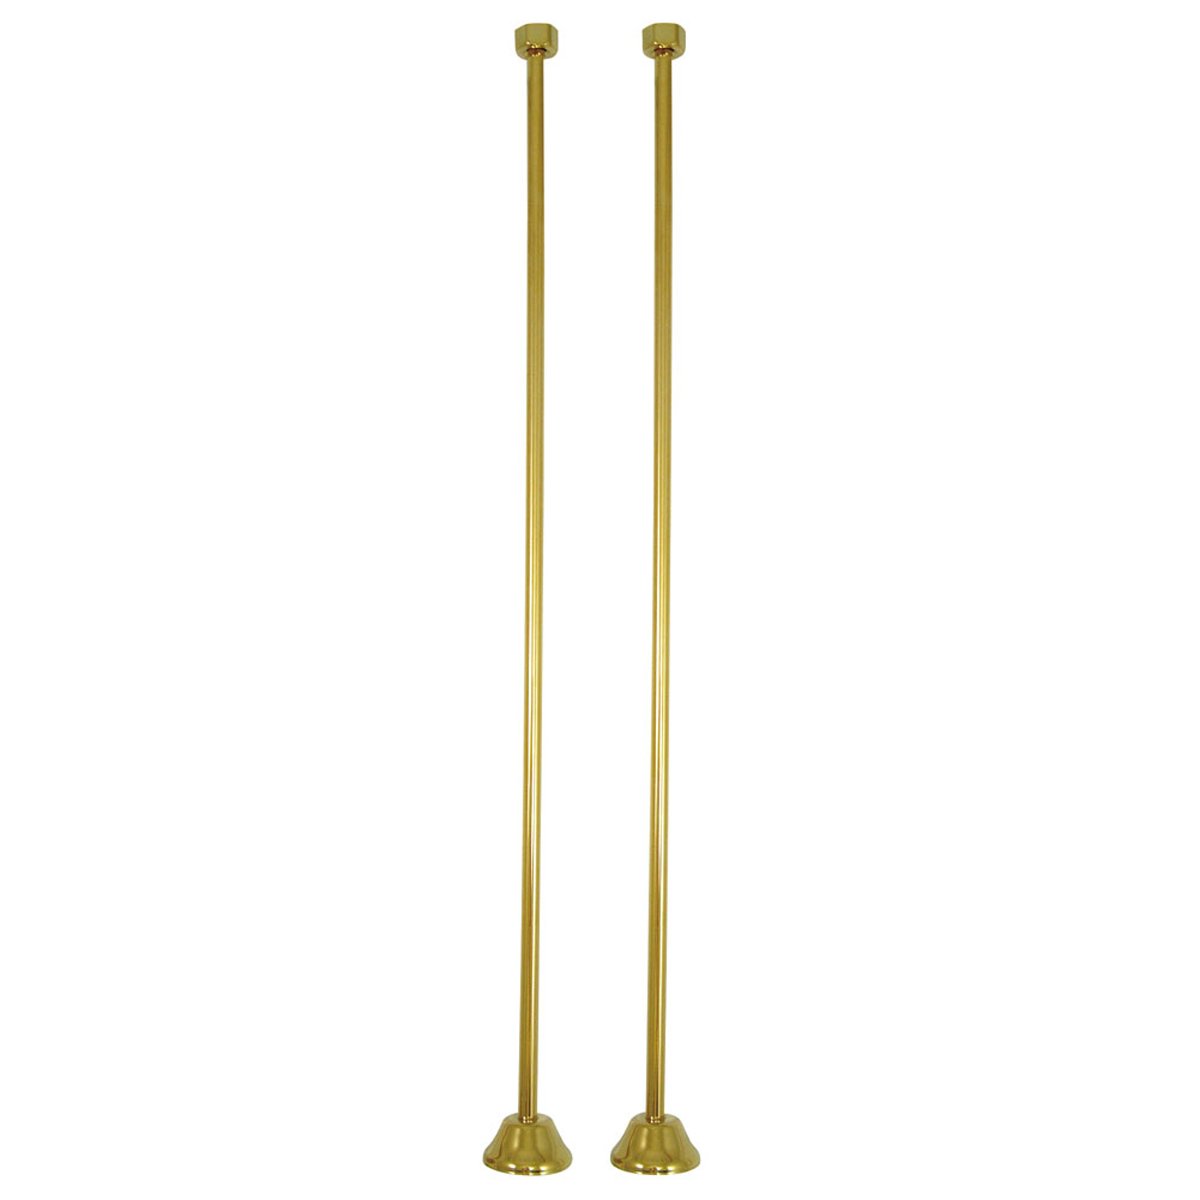 Kingston Brass Vintage Straight Bath Supply Lines in Polished Brass-Bathroom Accessories-Free Shipping-Directsinks.